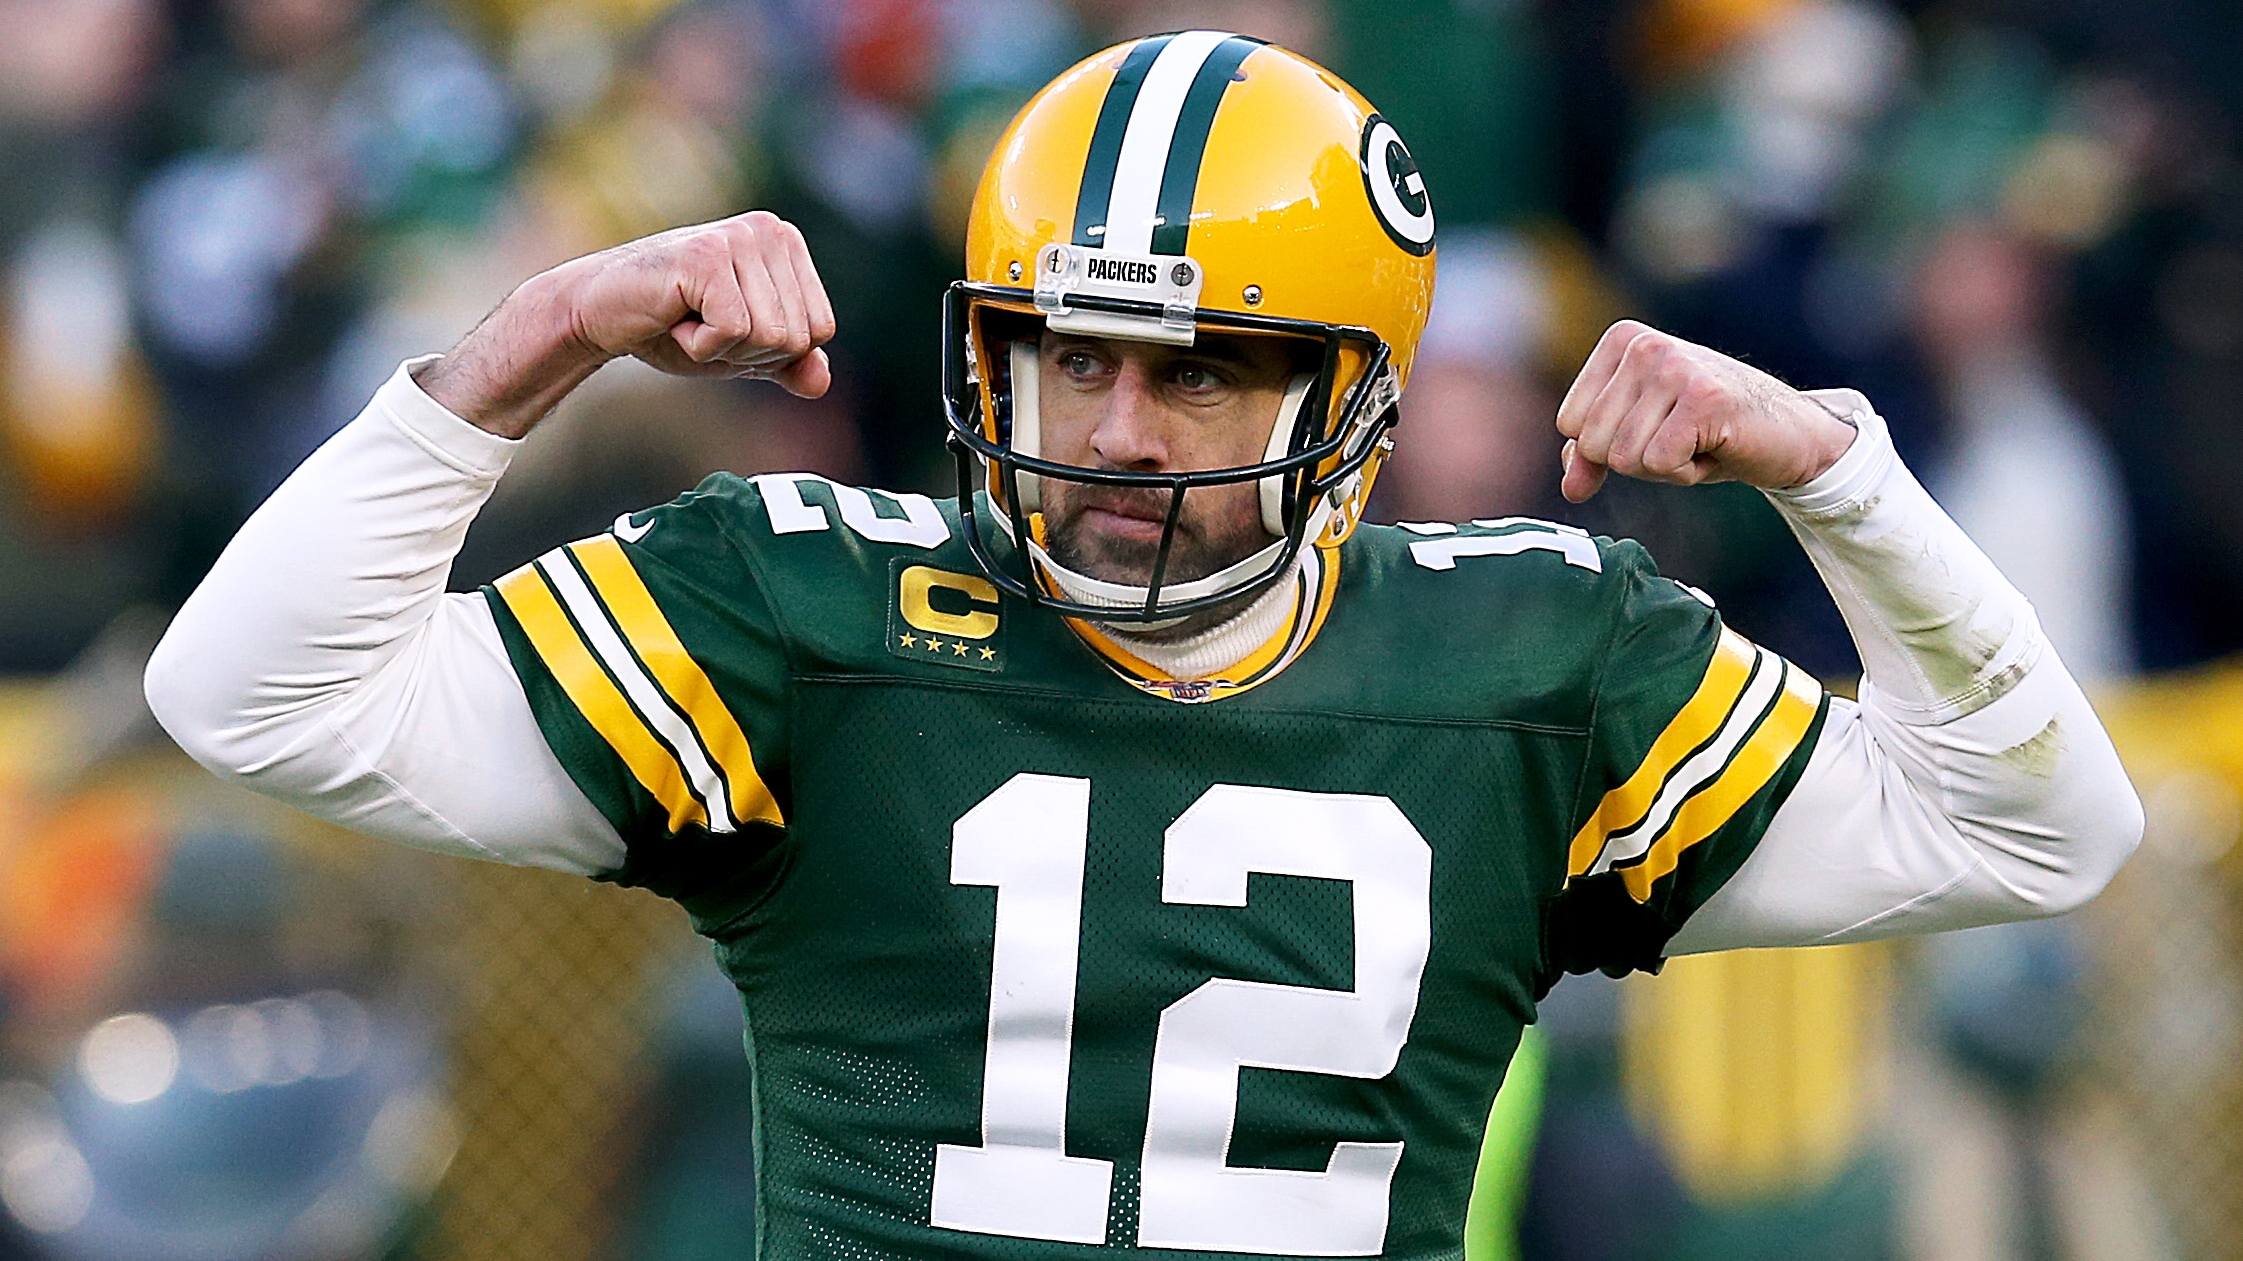 Aaron Rodgers not 'thrilled' with Green Bay Packers drafting QB, says understands